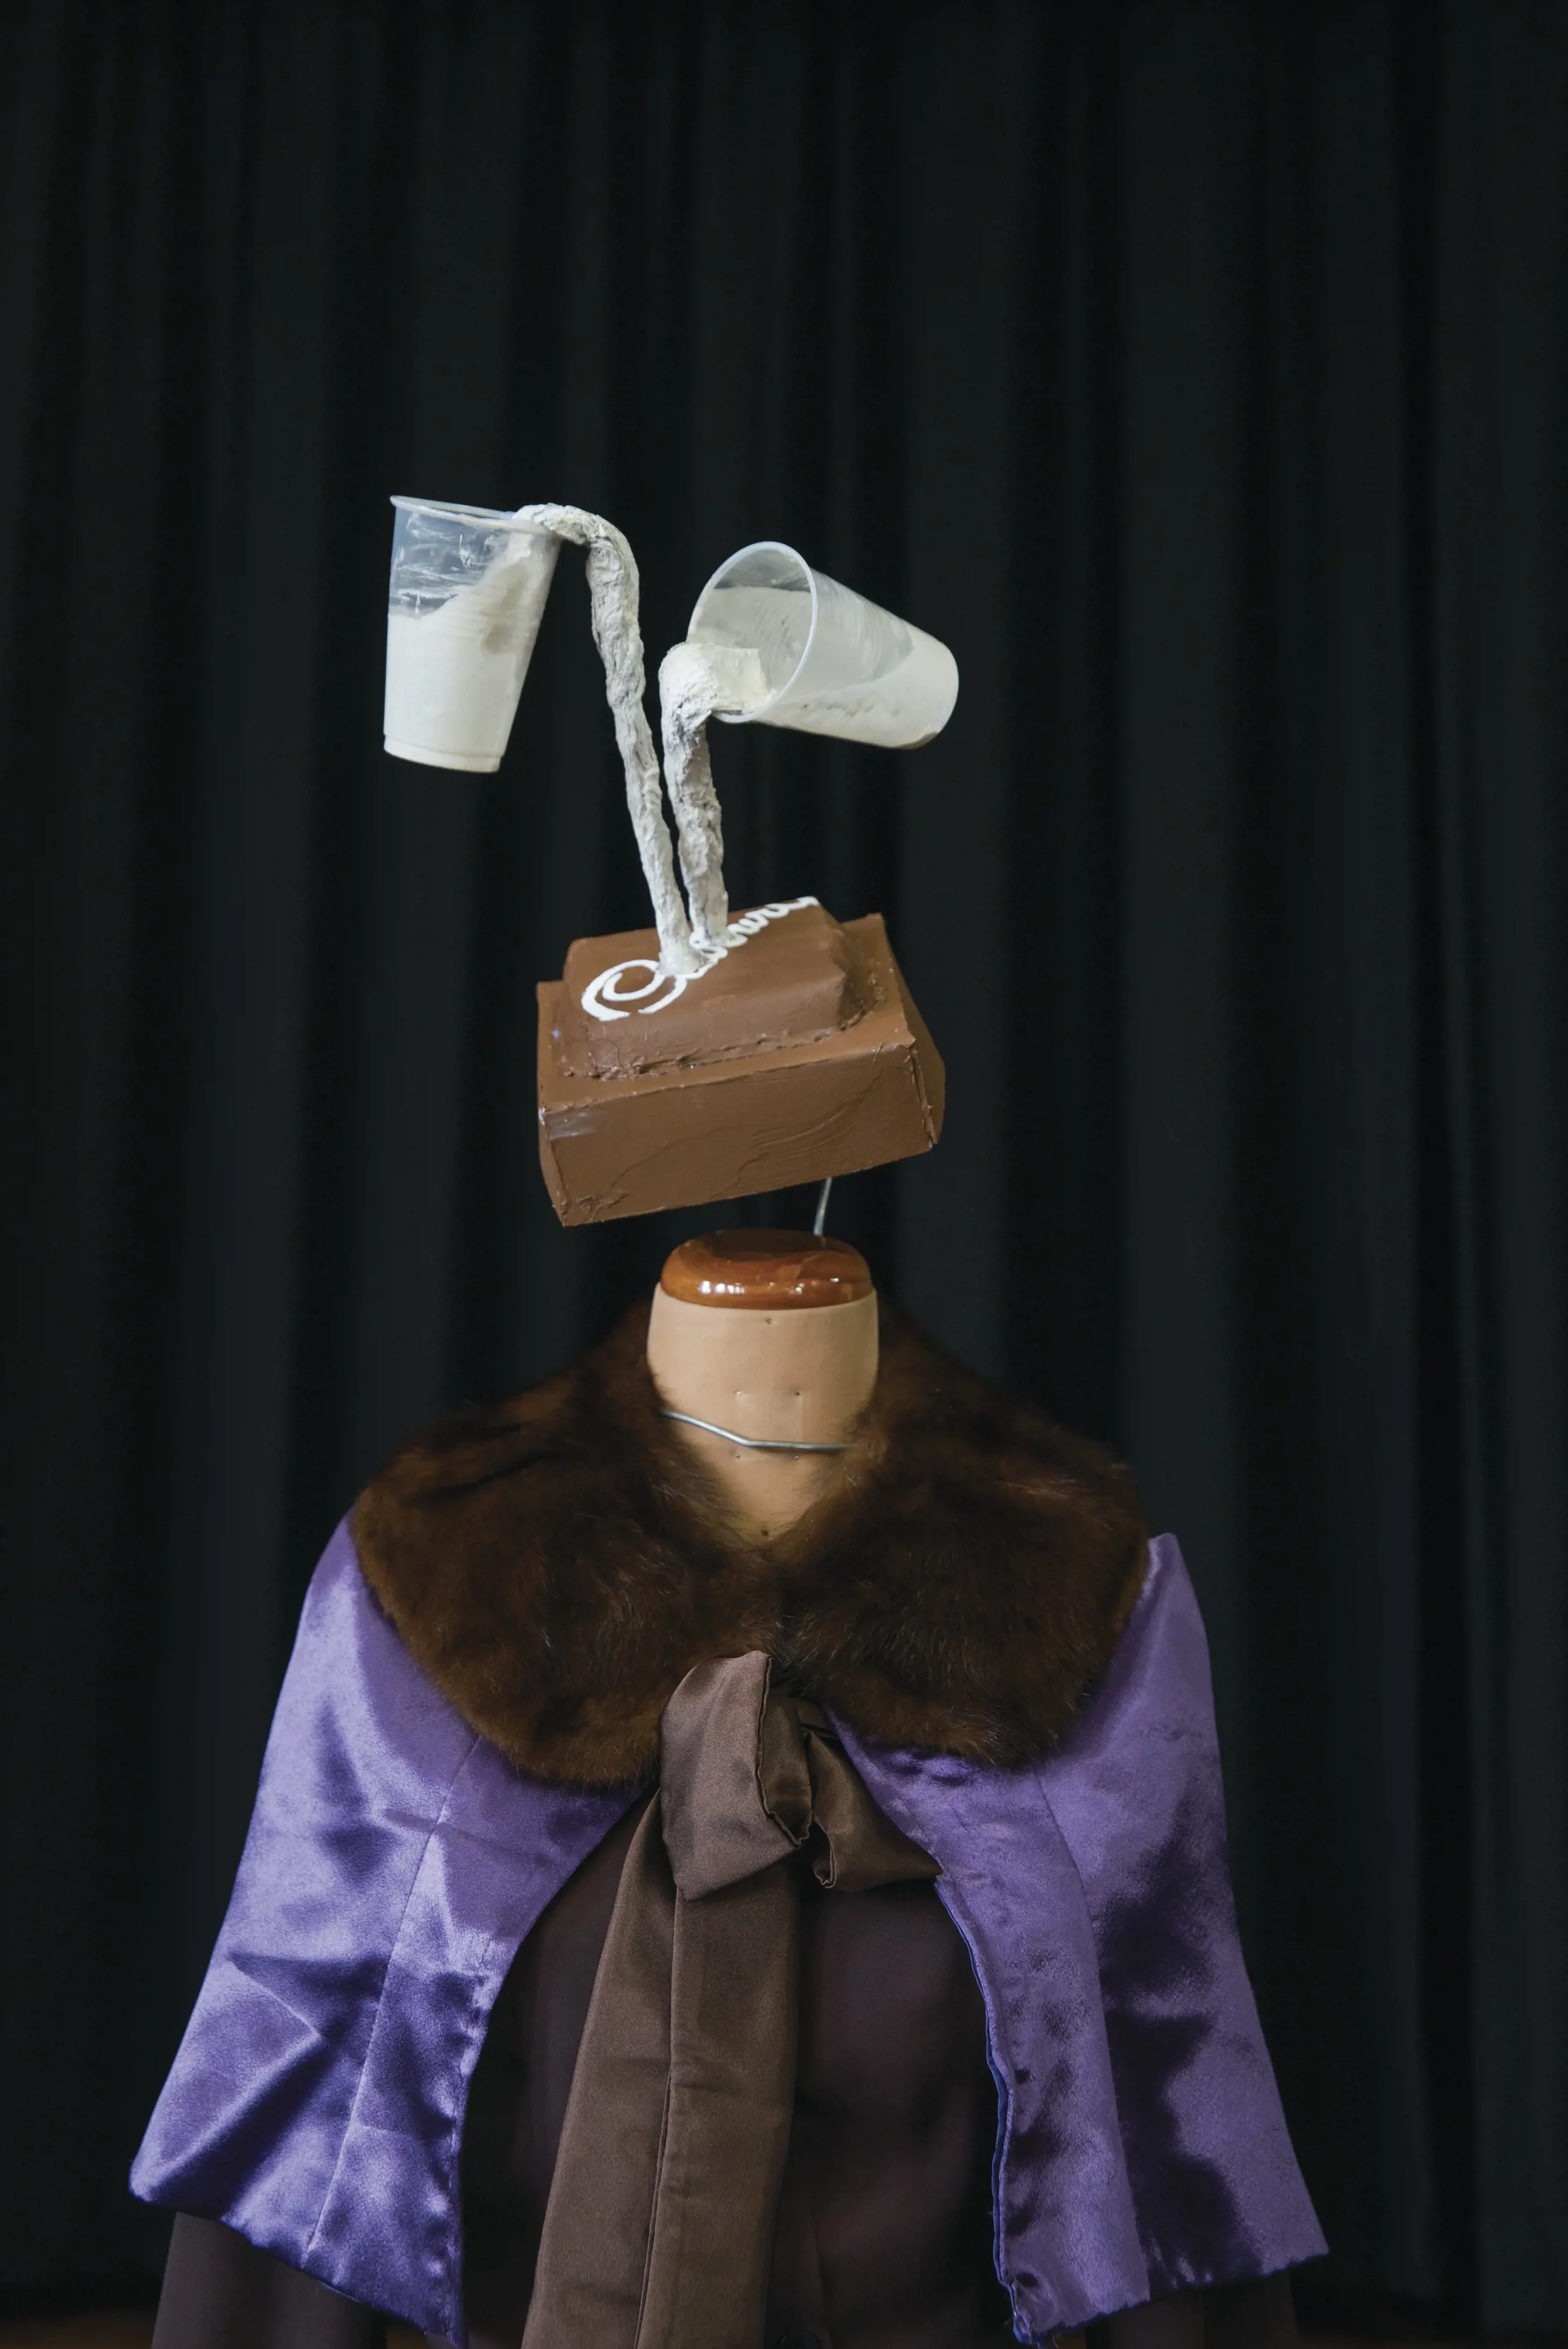 An abstract statue depicting Cadbury Chocolate block as a head with two glasses of milk poured onto it, accompanied by a mannequin body. For Chocolate Winterfest.